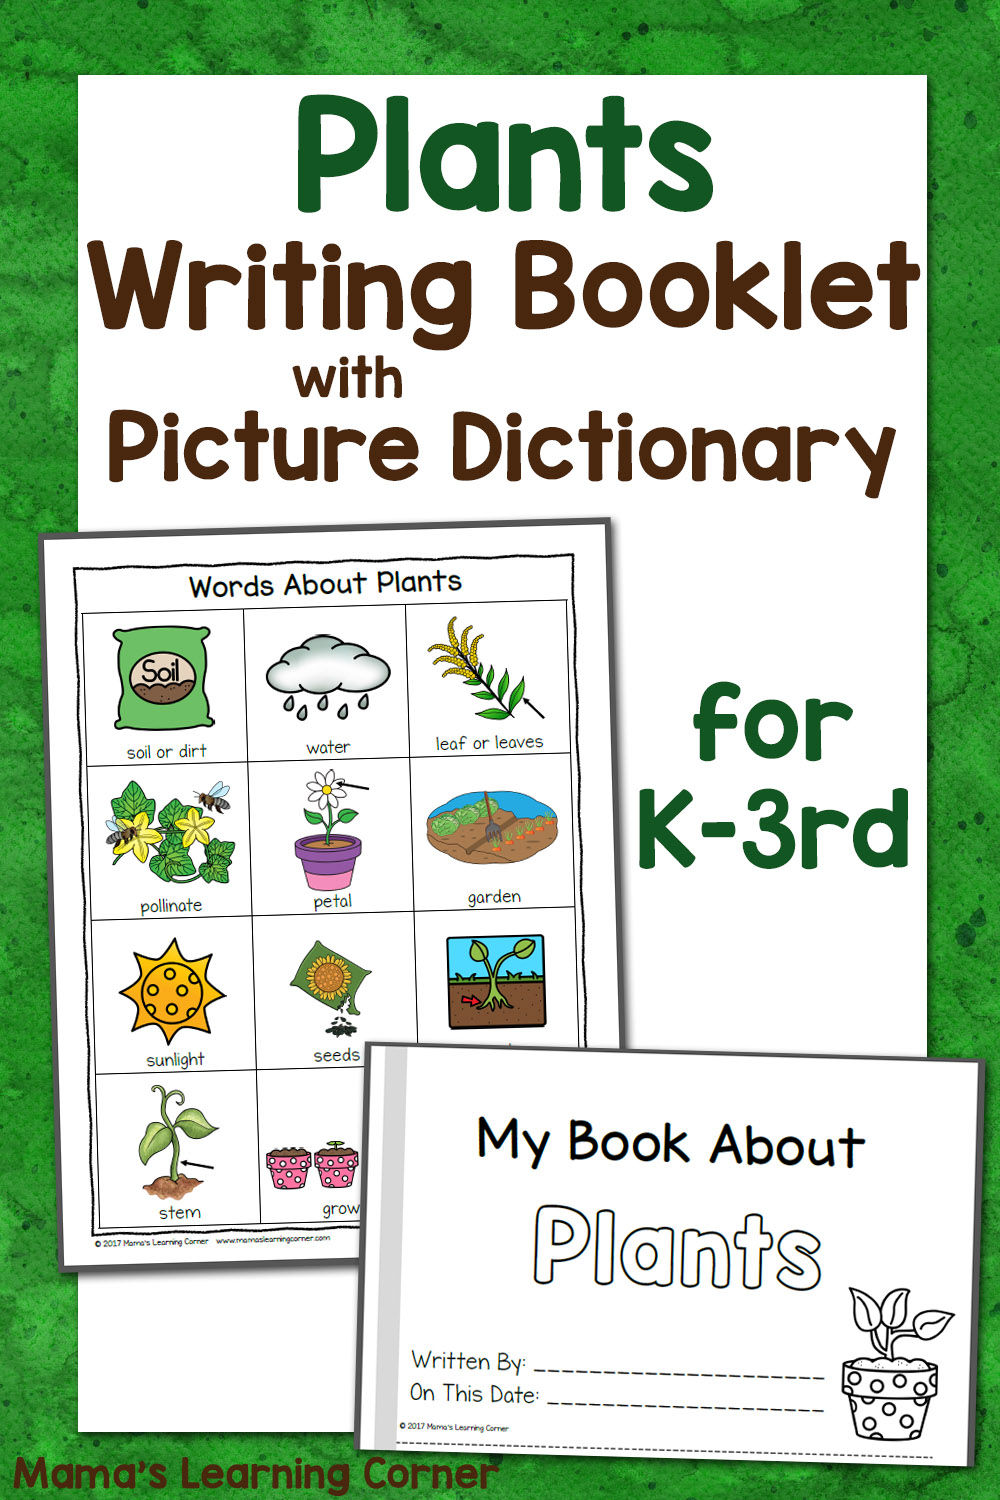 Plants Writing Booklet with Picture Dictionary - Mamas Learning Corner